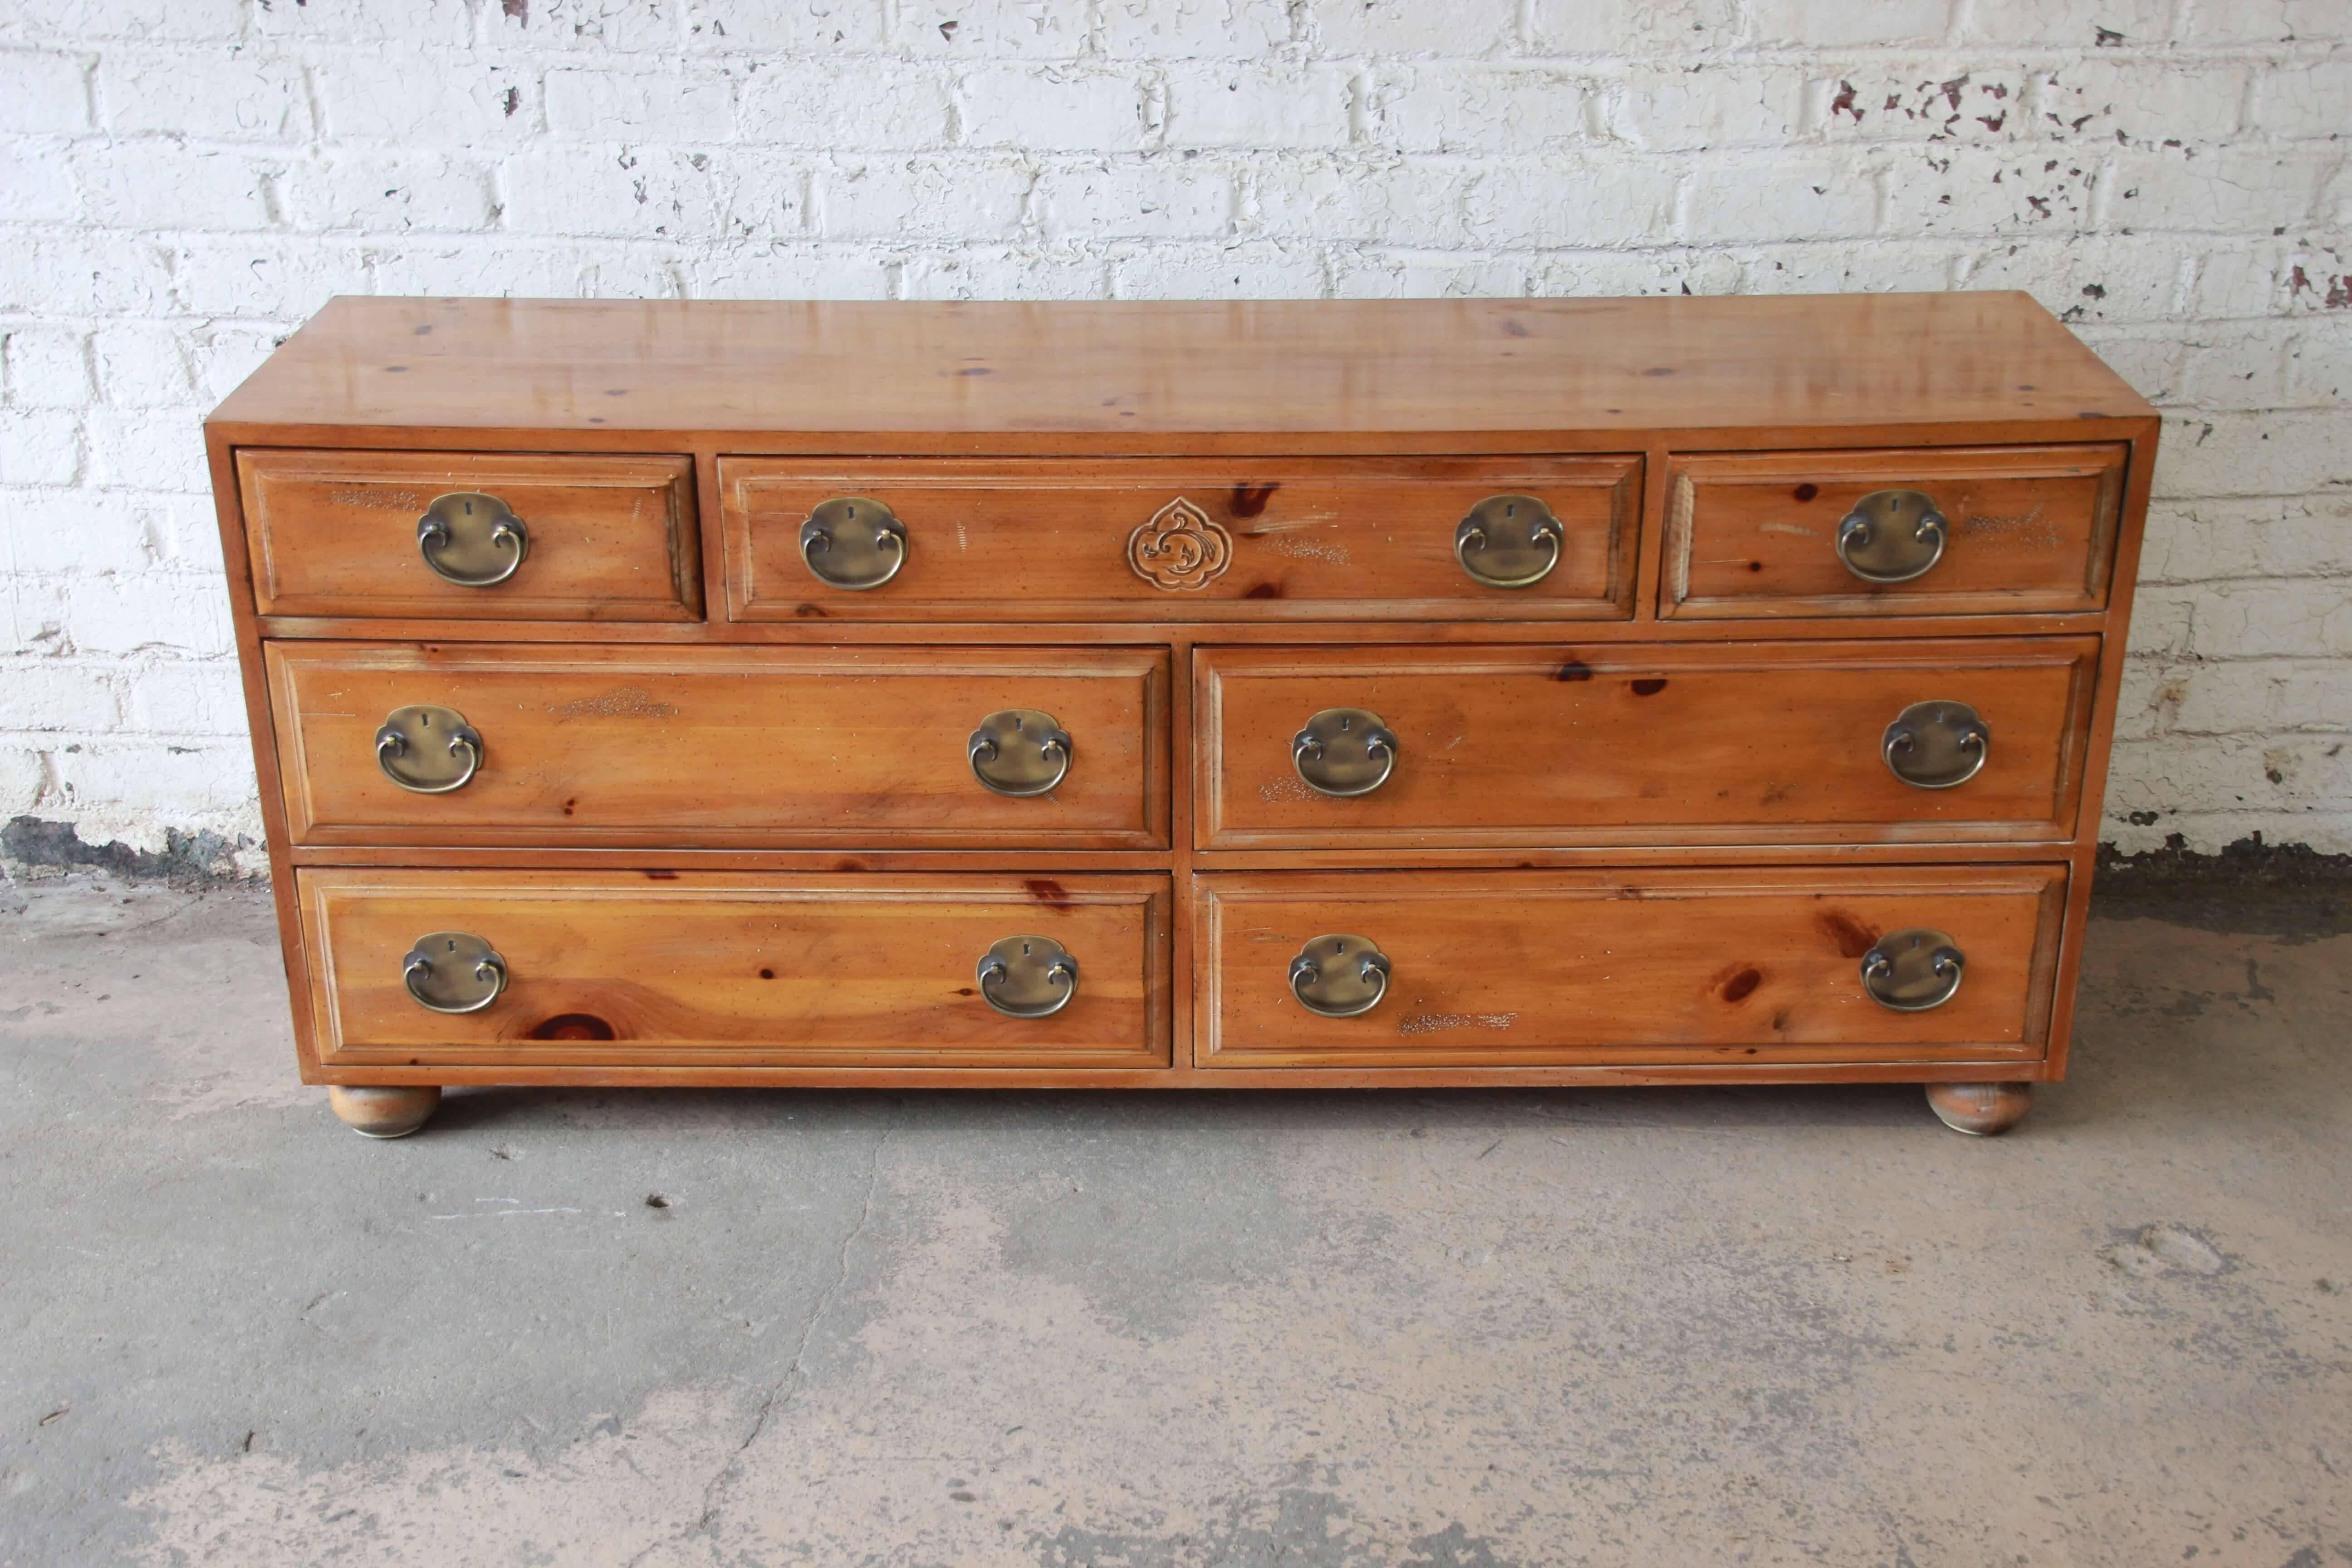 Offering a very nice solid pine seven-drawer dresser by Henrendon Furniture. The long dresser has large drawers offering ample room for storage along with brass hardware. The bottom of the dresser has four drawers and above are two smaller drawers